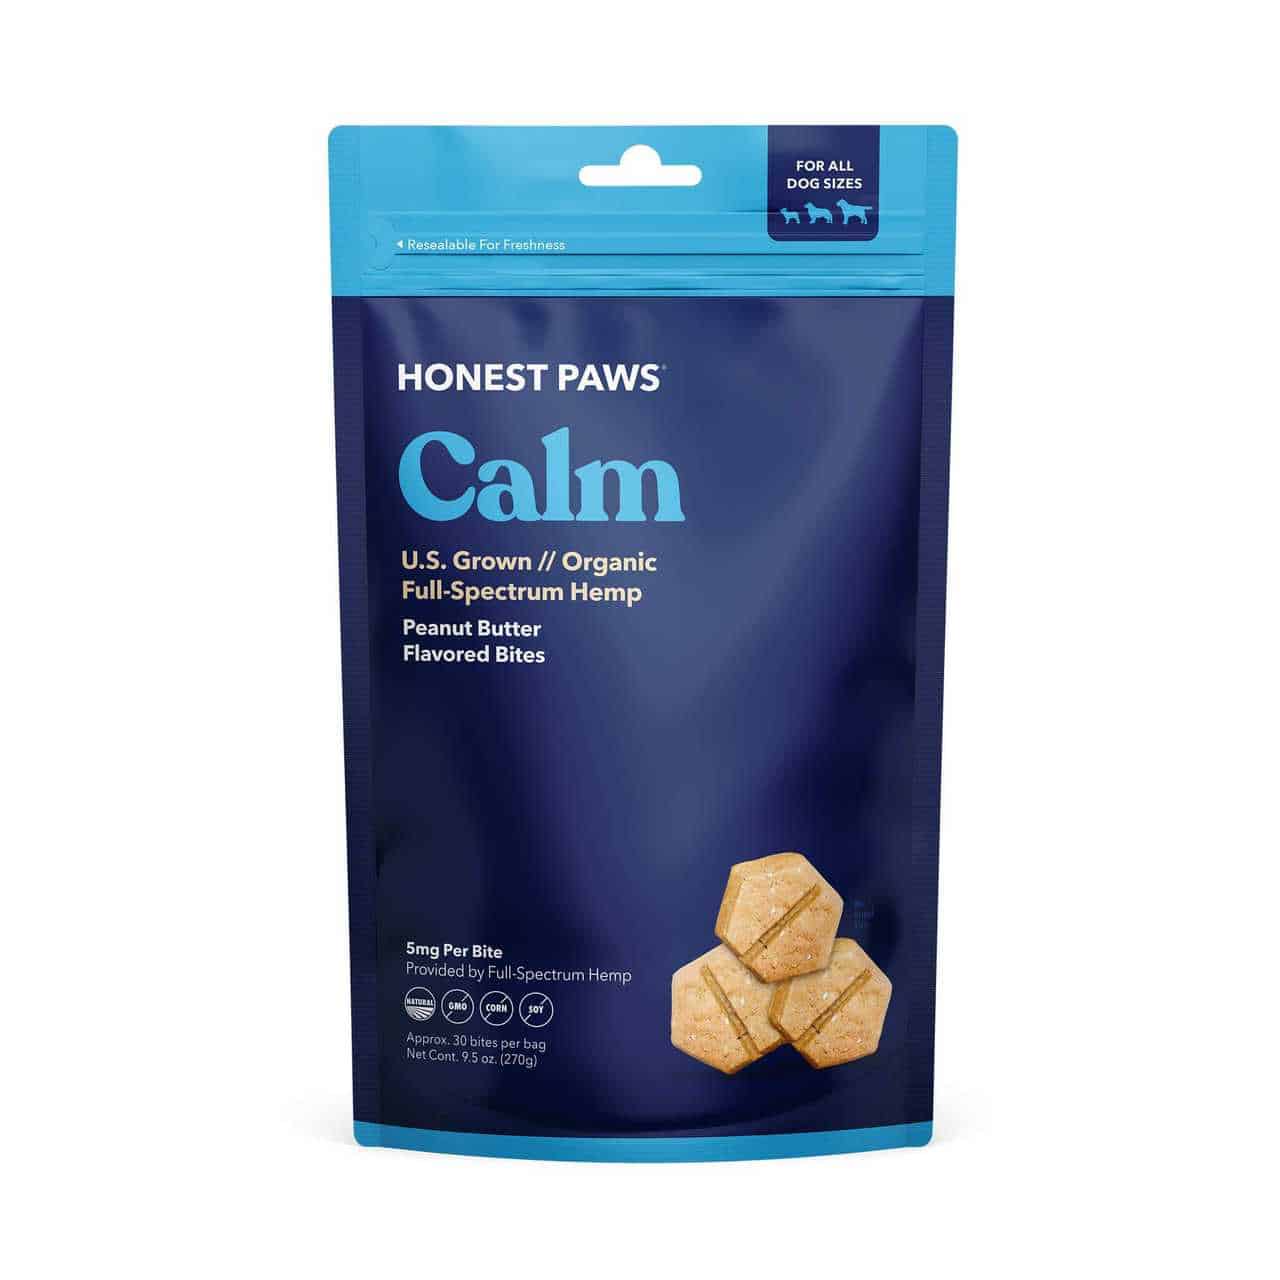 Pawsitively Calm: CBD Treats to Soothe Your Furry Friend